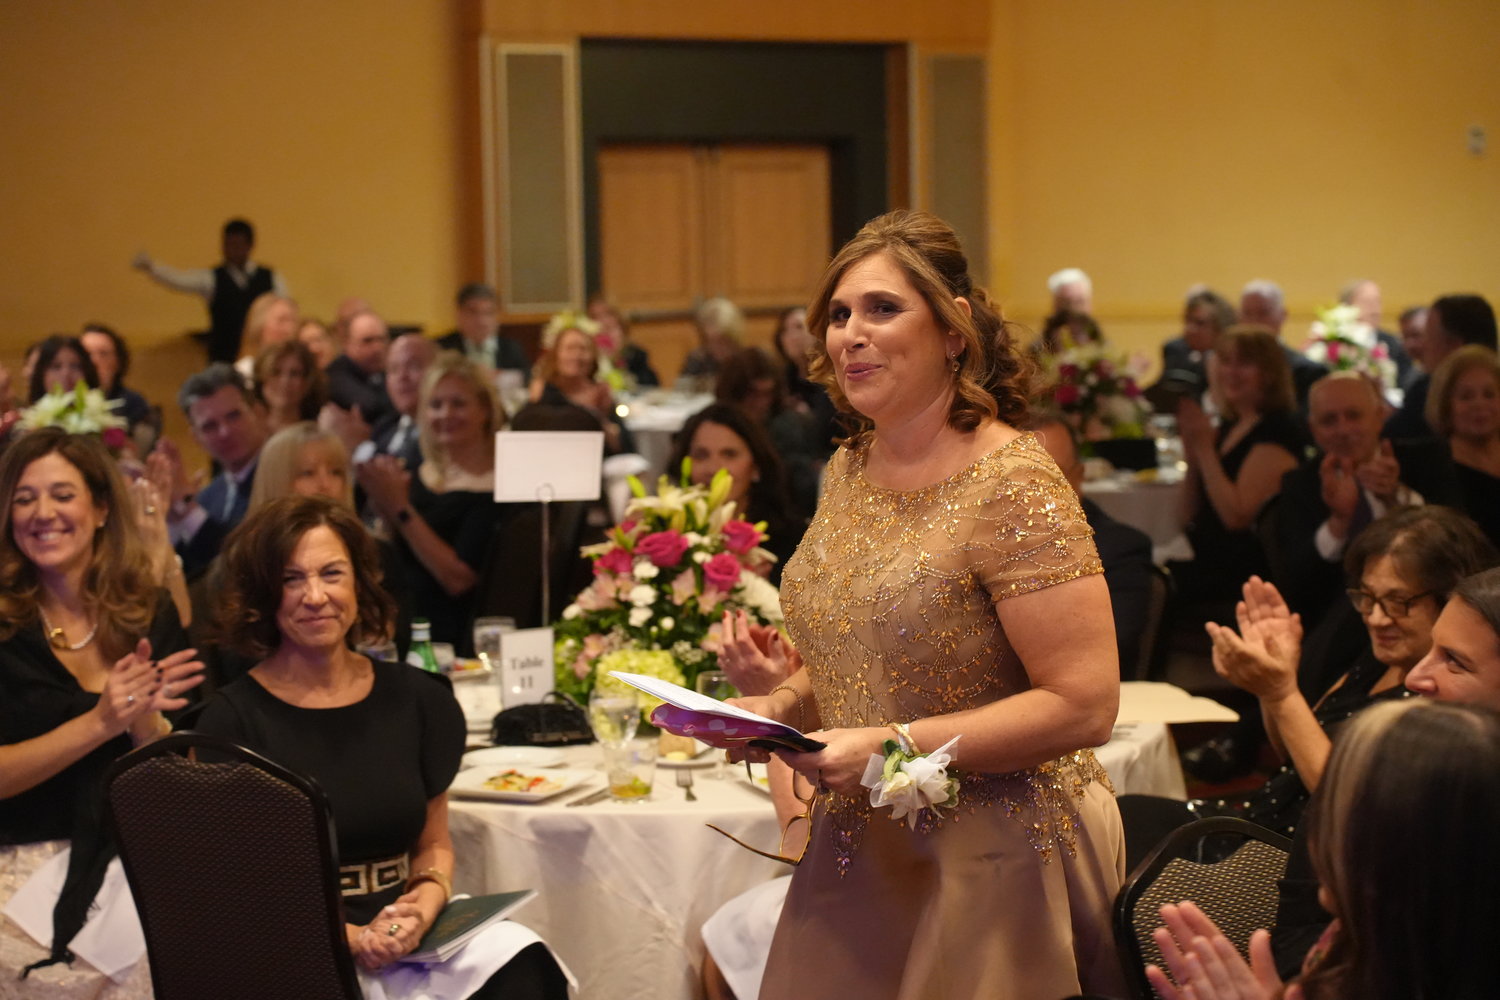 Frances Barricelli, the library-media specialist at the St. Agnes Cathedral School, was one of five award recipients honored at the school’s annual Dinner Dance soiree.